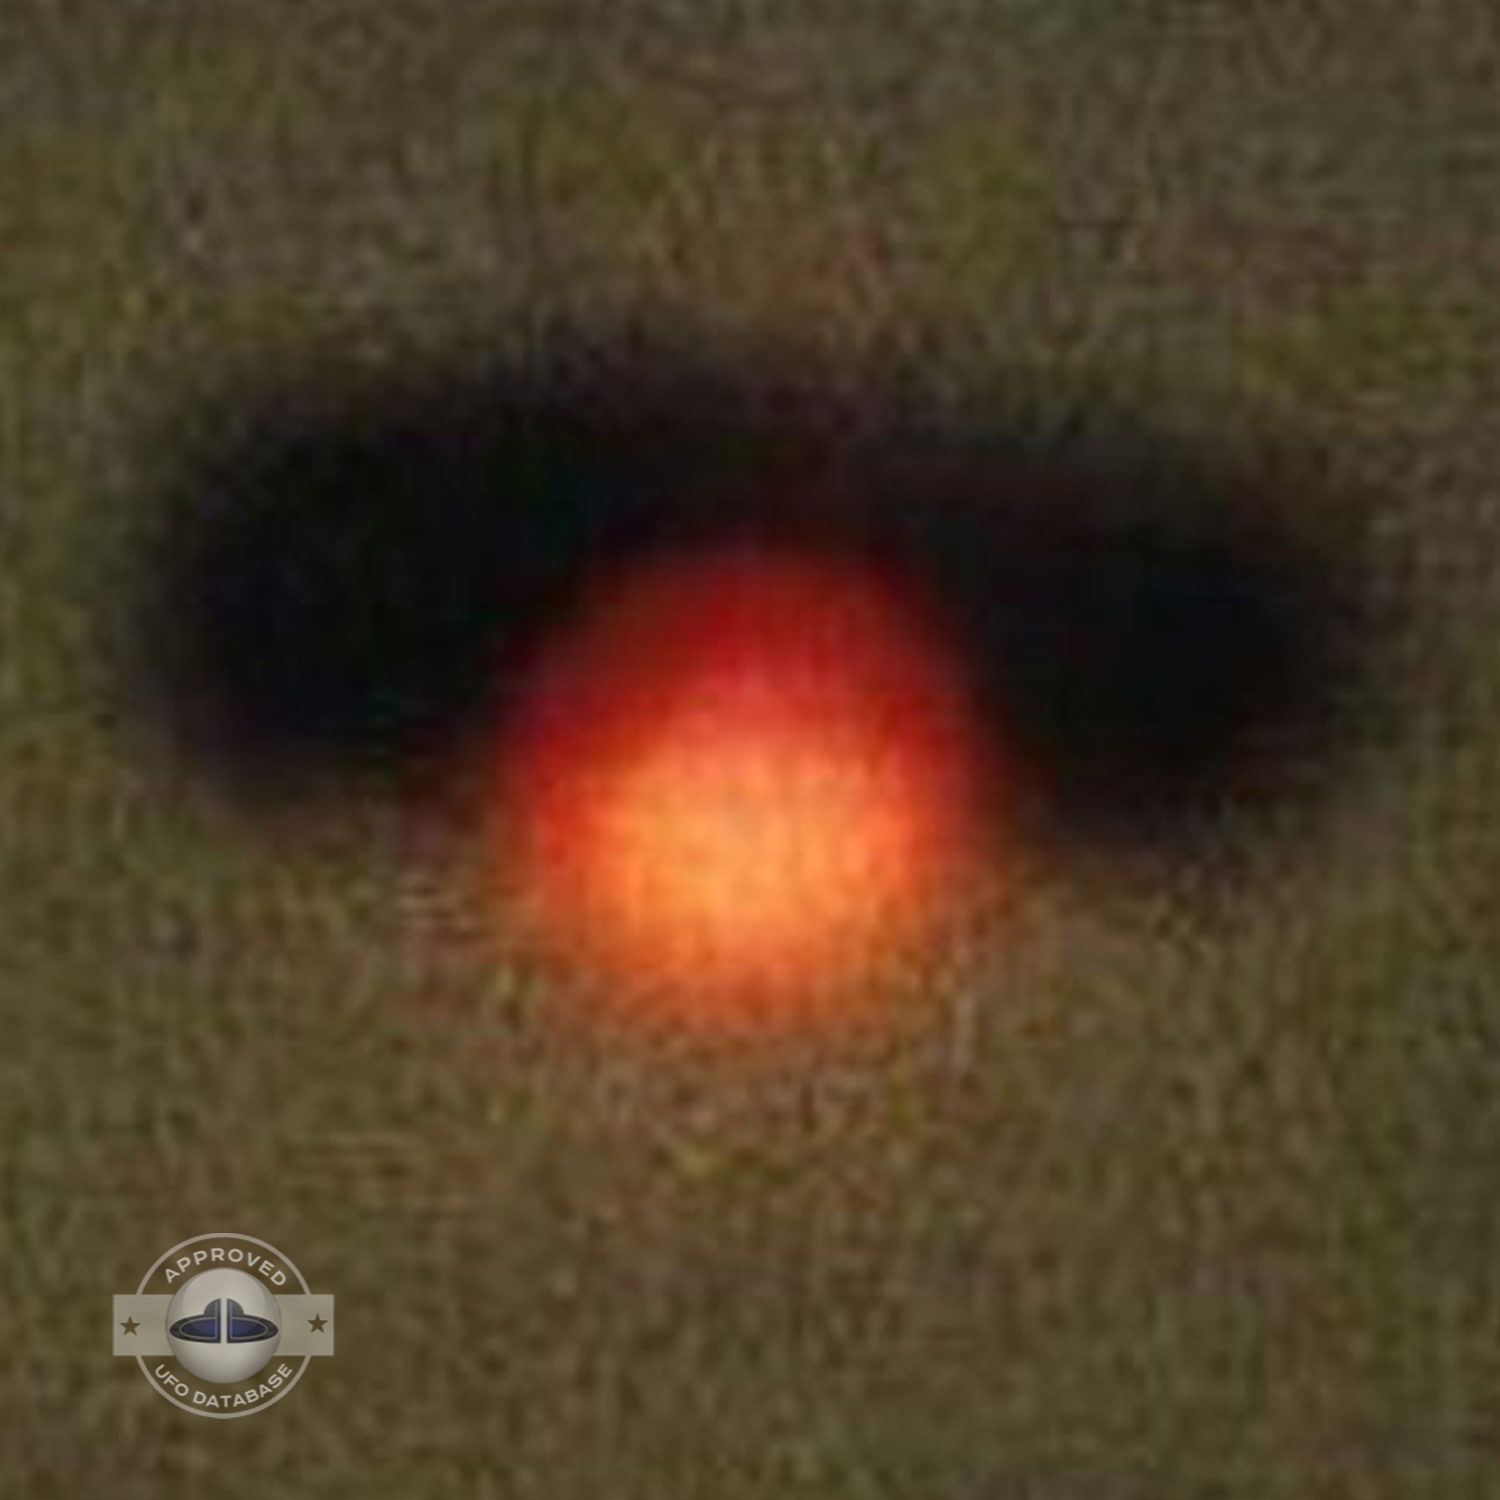 1993 UFO picture - part of The Gulf Breeze UFO incident - Florida USA UFO Picture #133-4